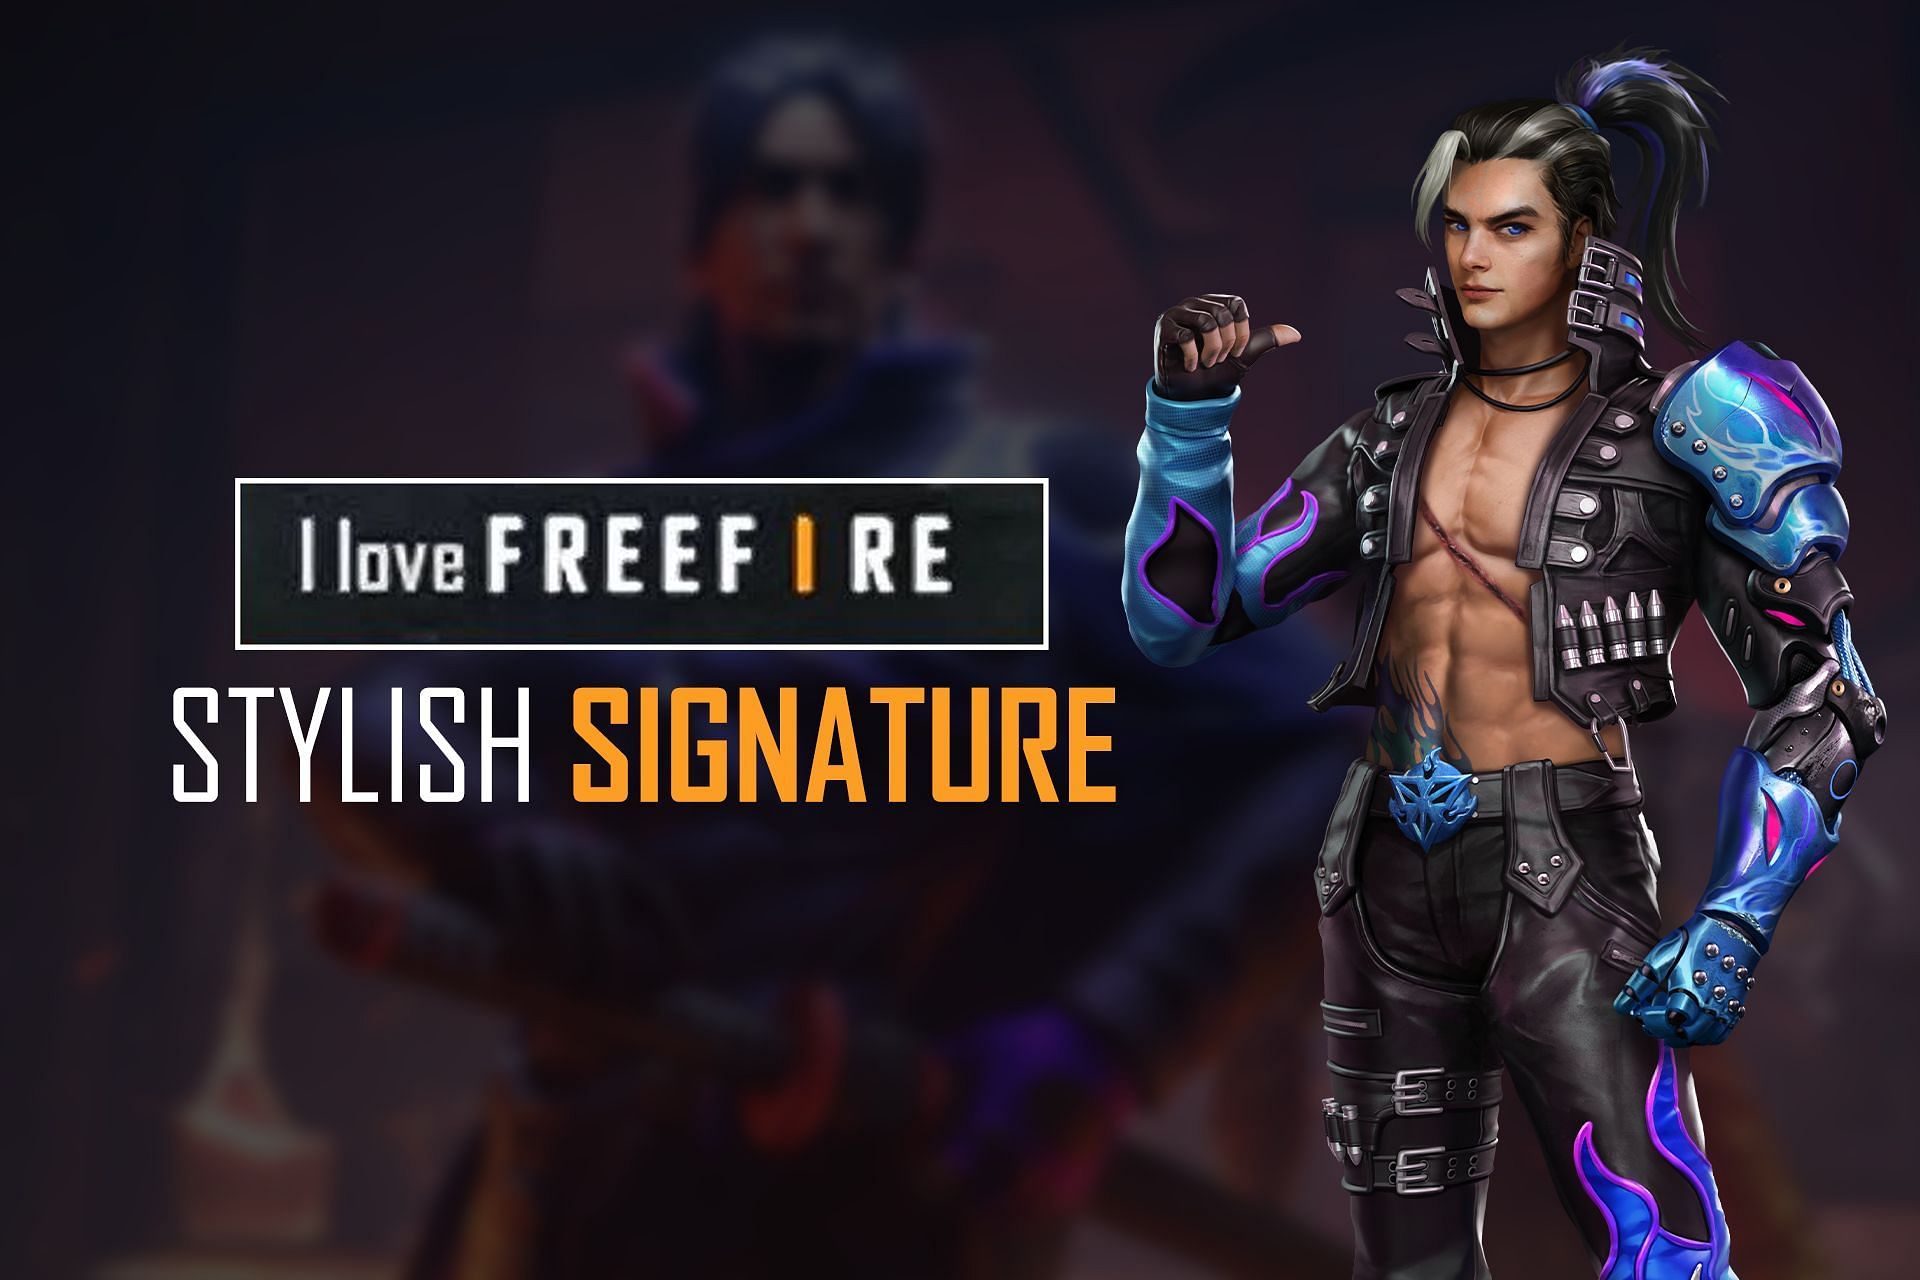 Players can have a stylish to make their Free Fire profiles more attractive (Image via Sportskeeda)